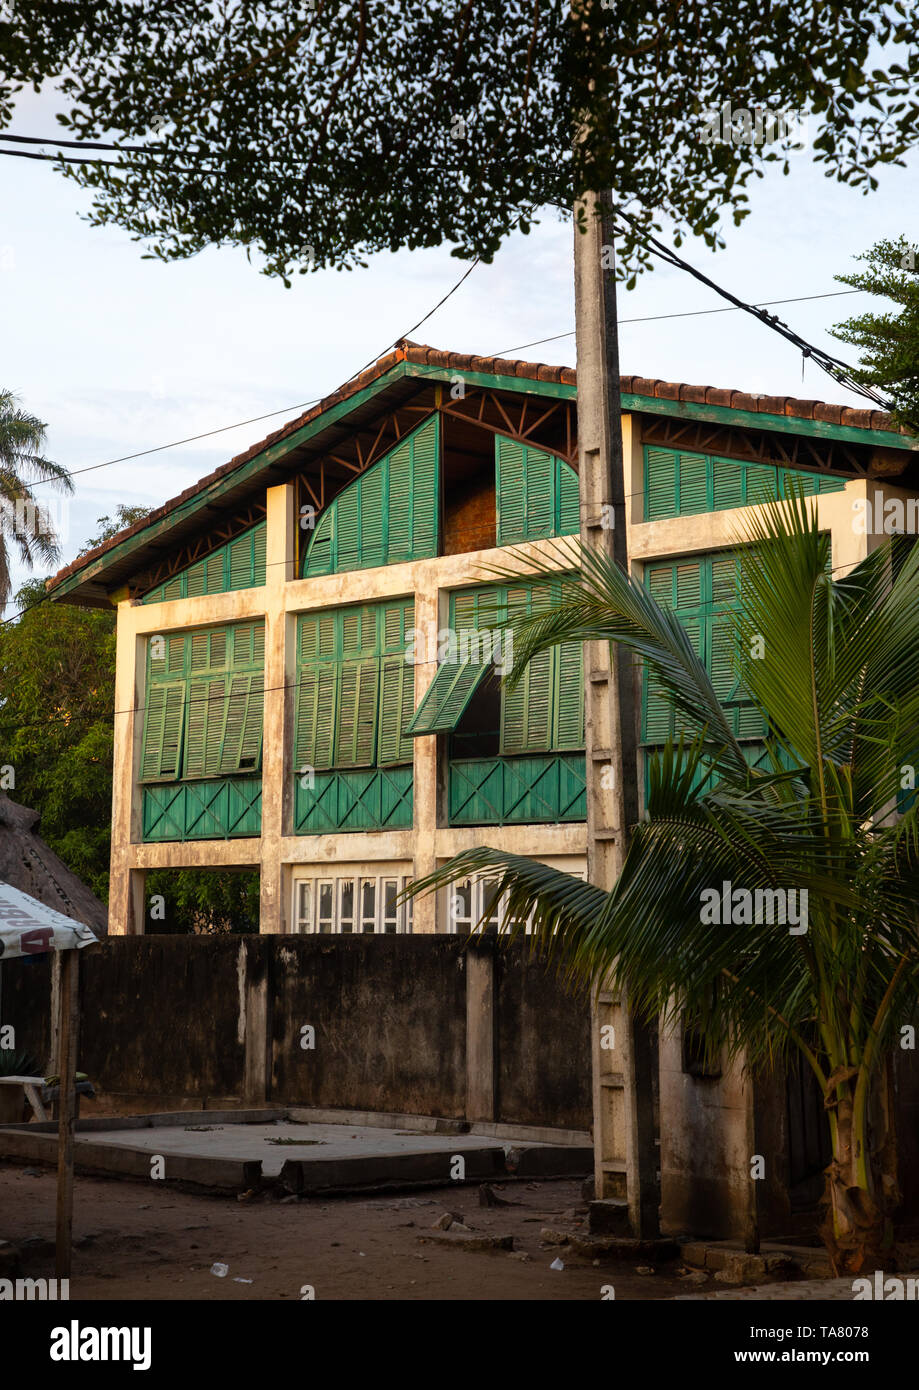 Old french colonial building formerly the customs house in the UNESCO world heritage area, Sud-Comoé, Grand-Bassam, Ivory Coast Stock Photo